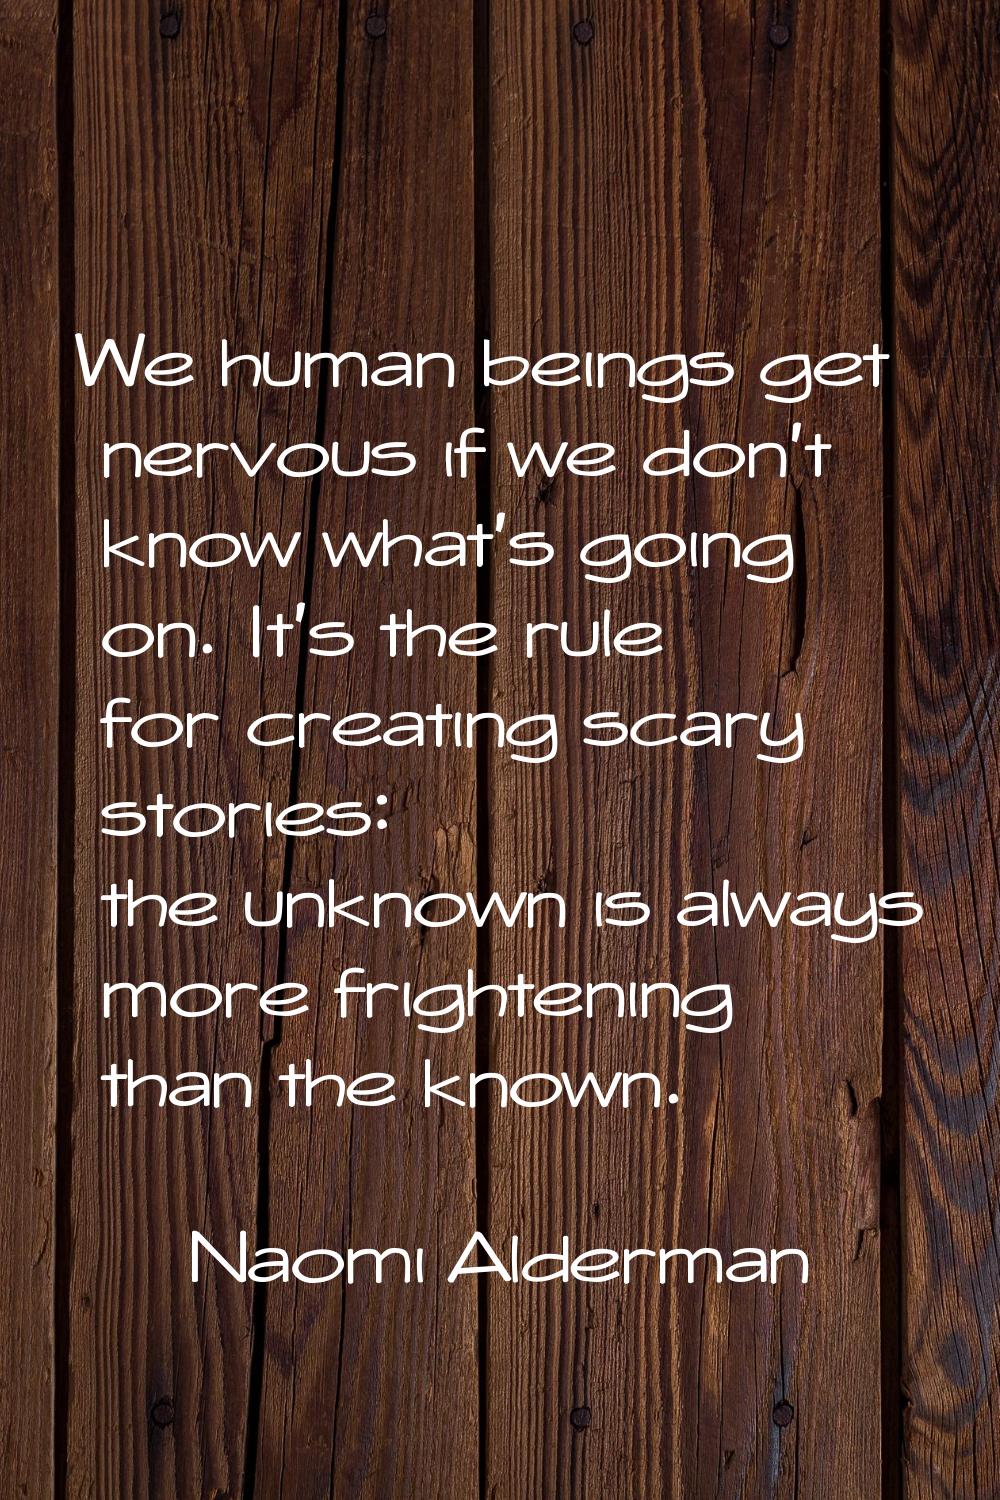 We human beings get nervous if we don't know what's going on. It's the rule for creating scary stor